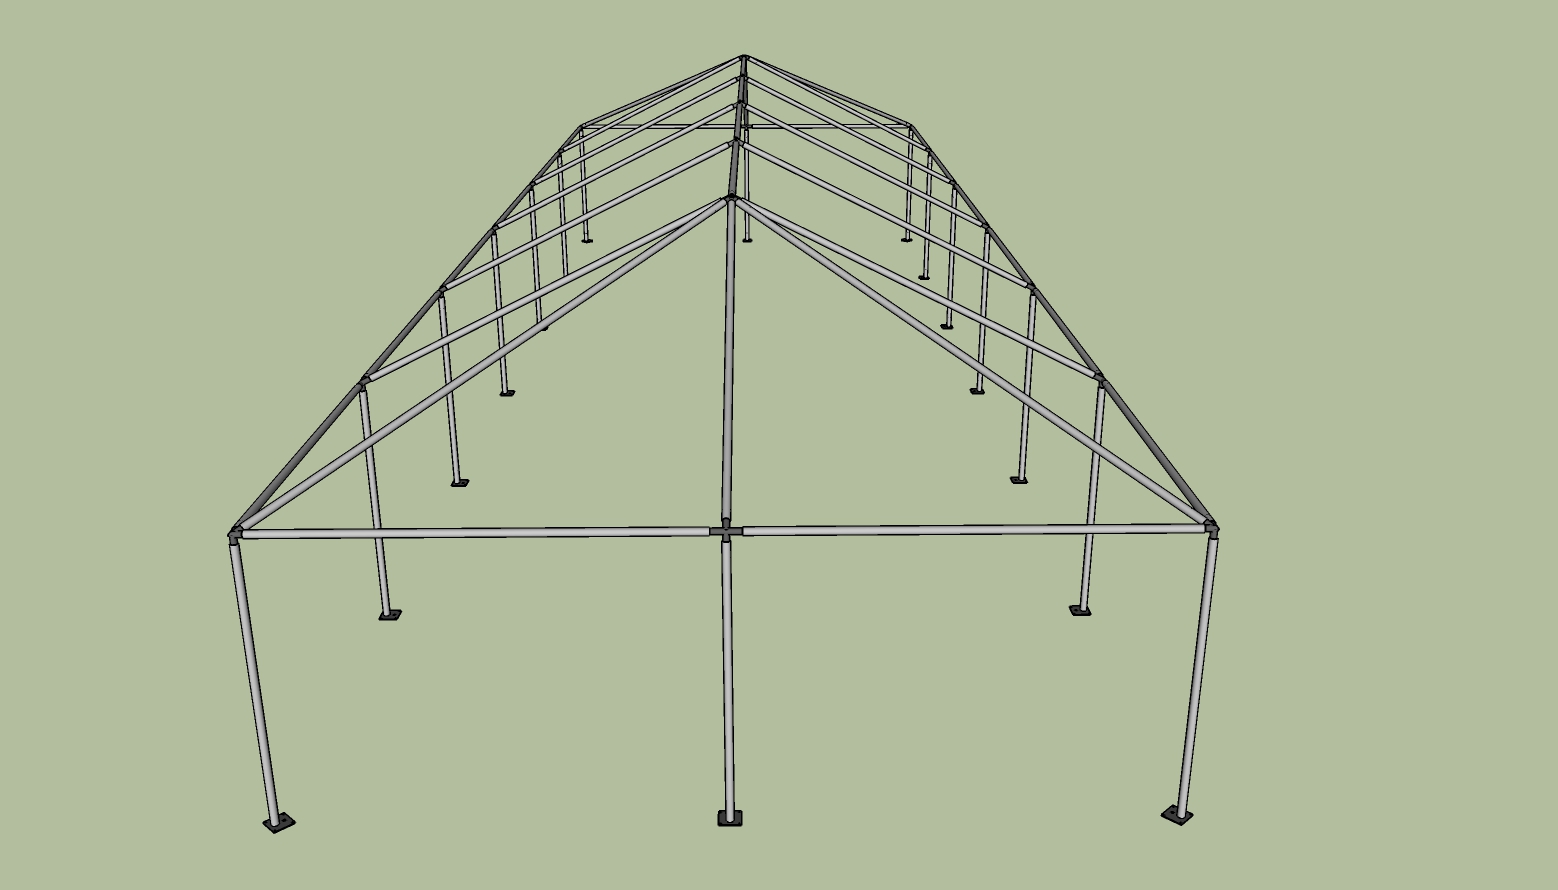 20x60 frame tent side view